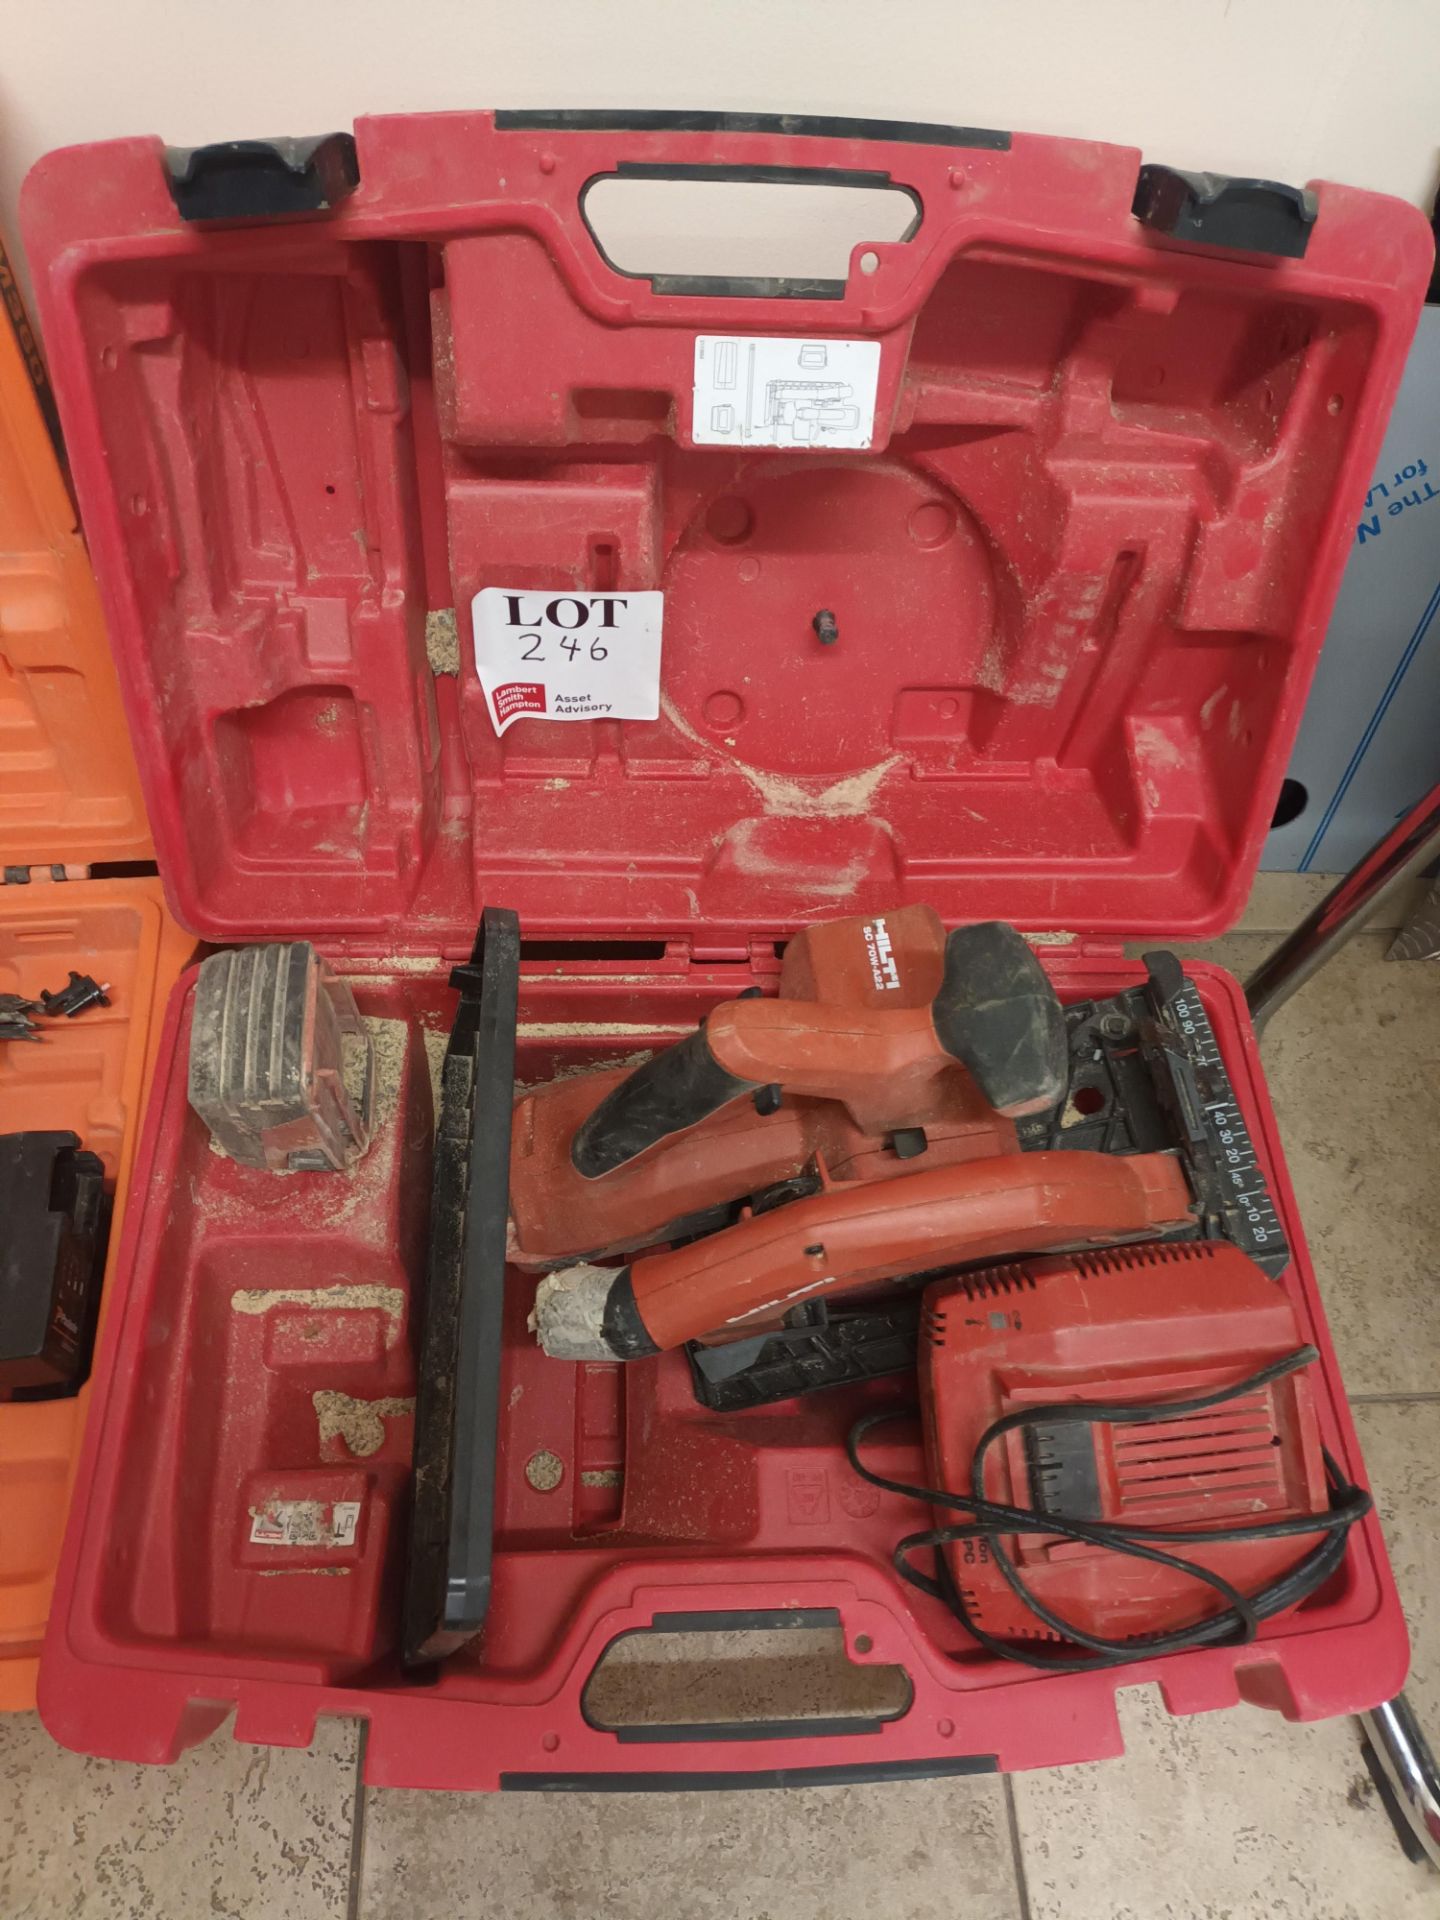 Hilti SC 70W-A22 cordless circular saw with battery, charger and carry case